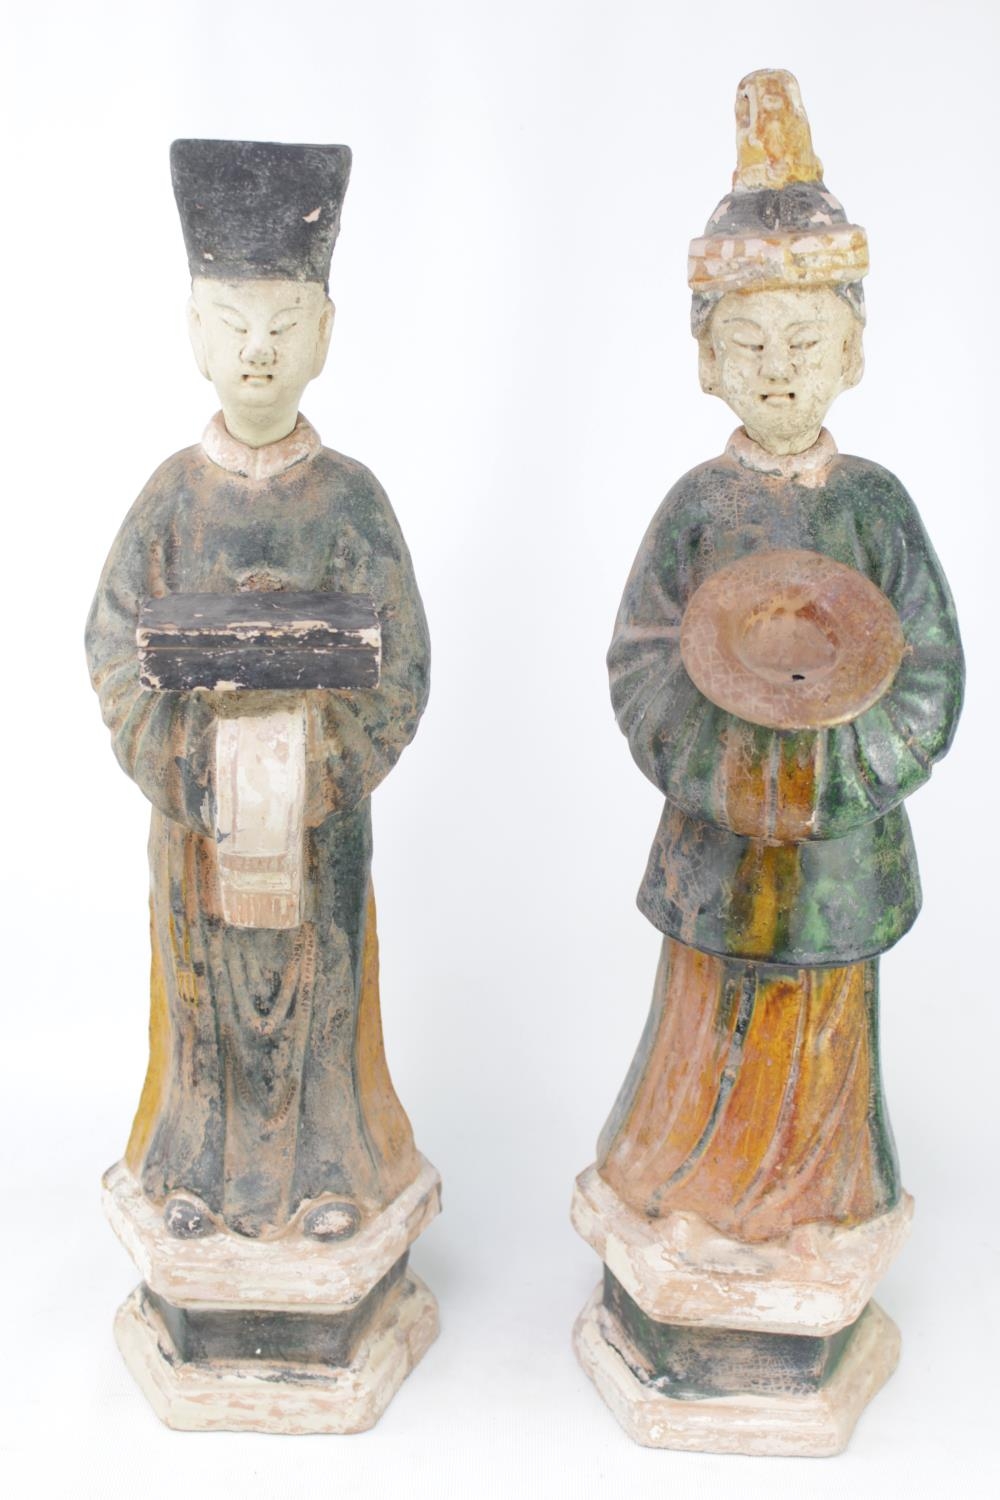 Pair of Antique Chinese green and amber lead-glazed pottery funerary figures in the form of